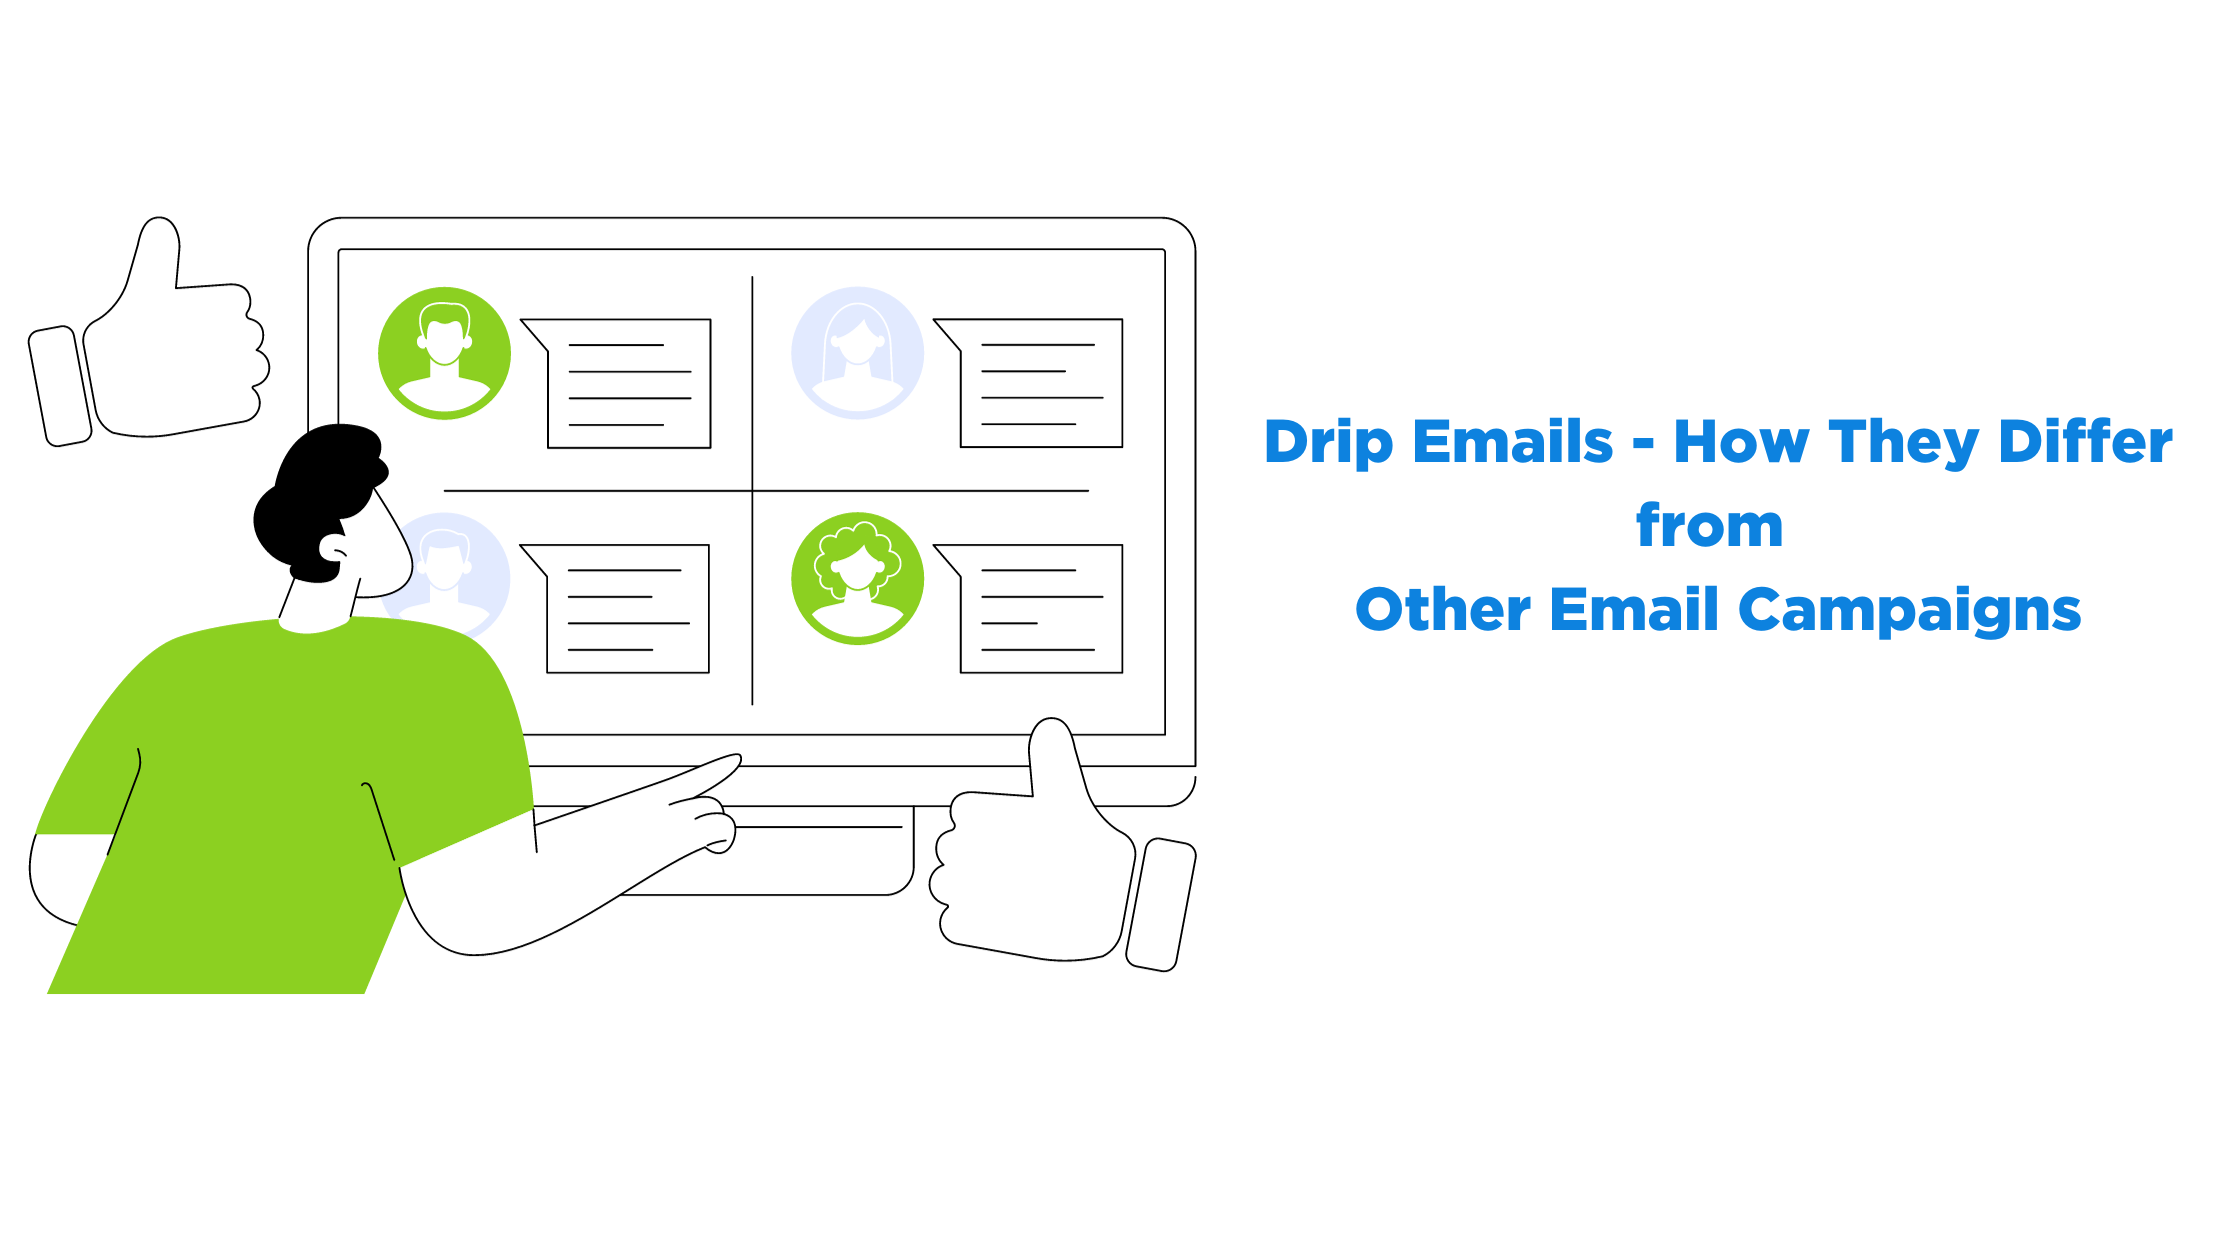 Drip Emails - How They Differ from Other Email Campaigns